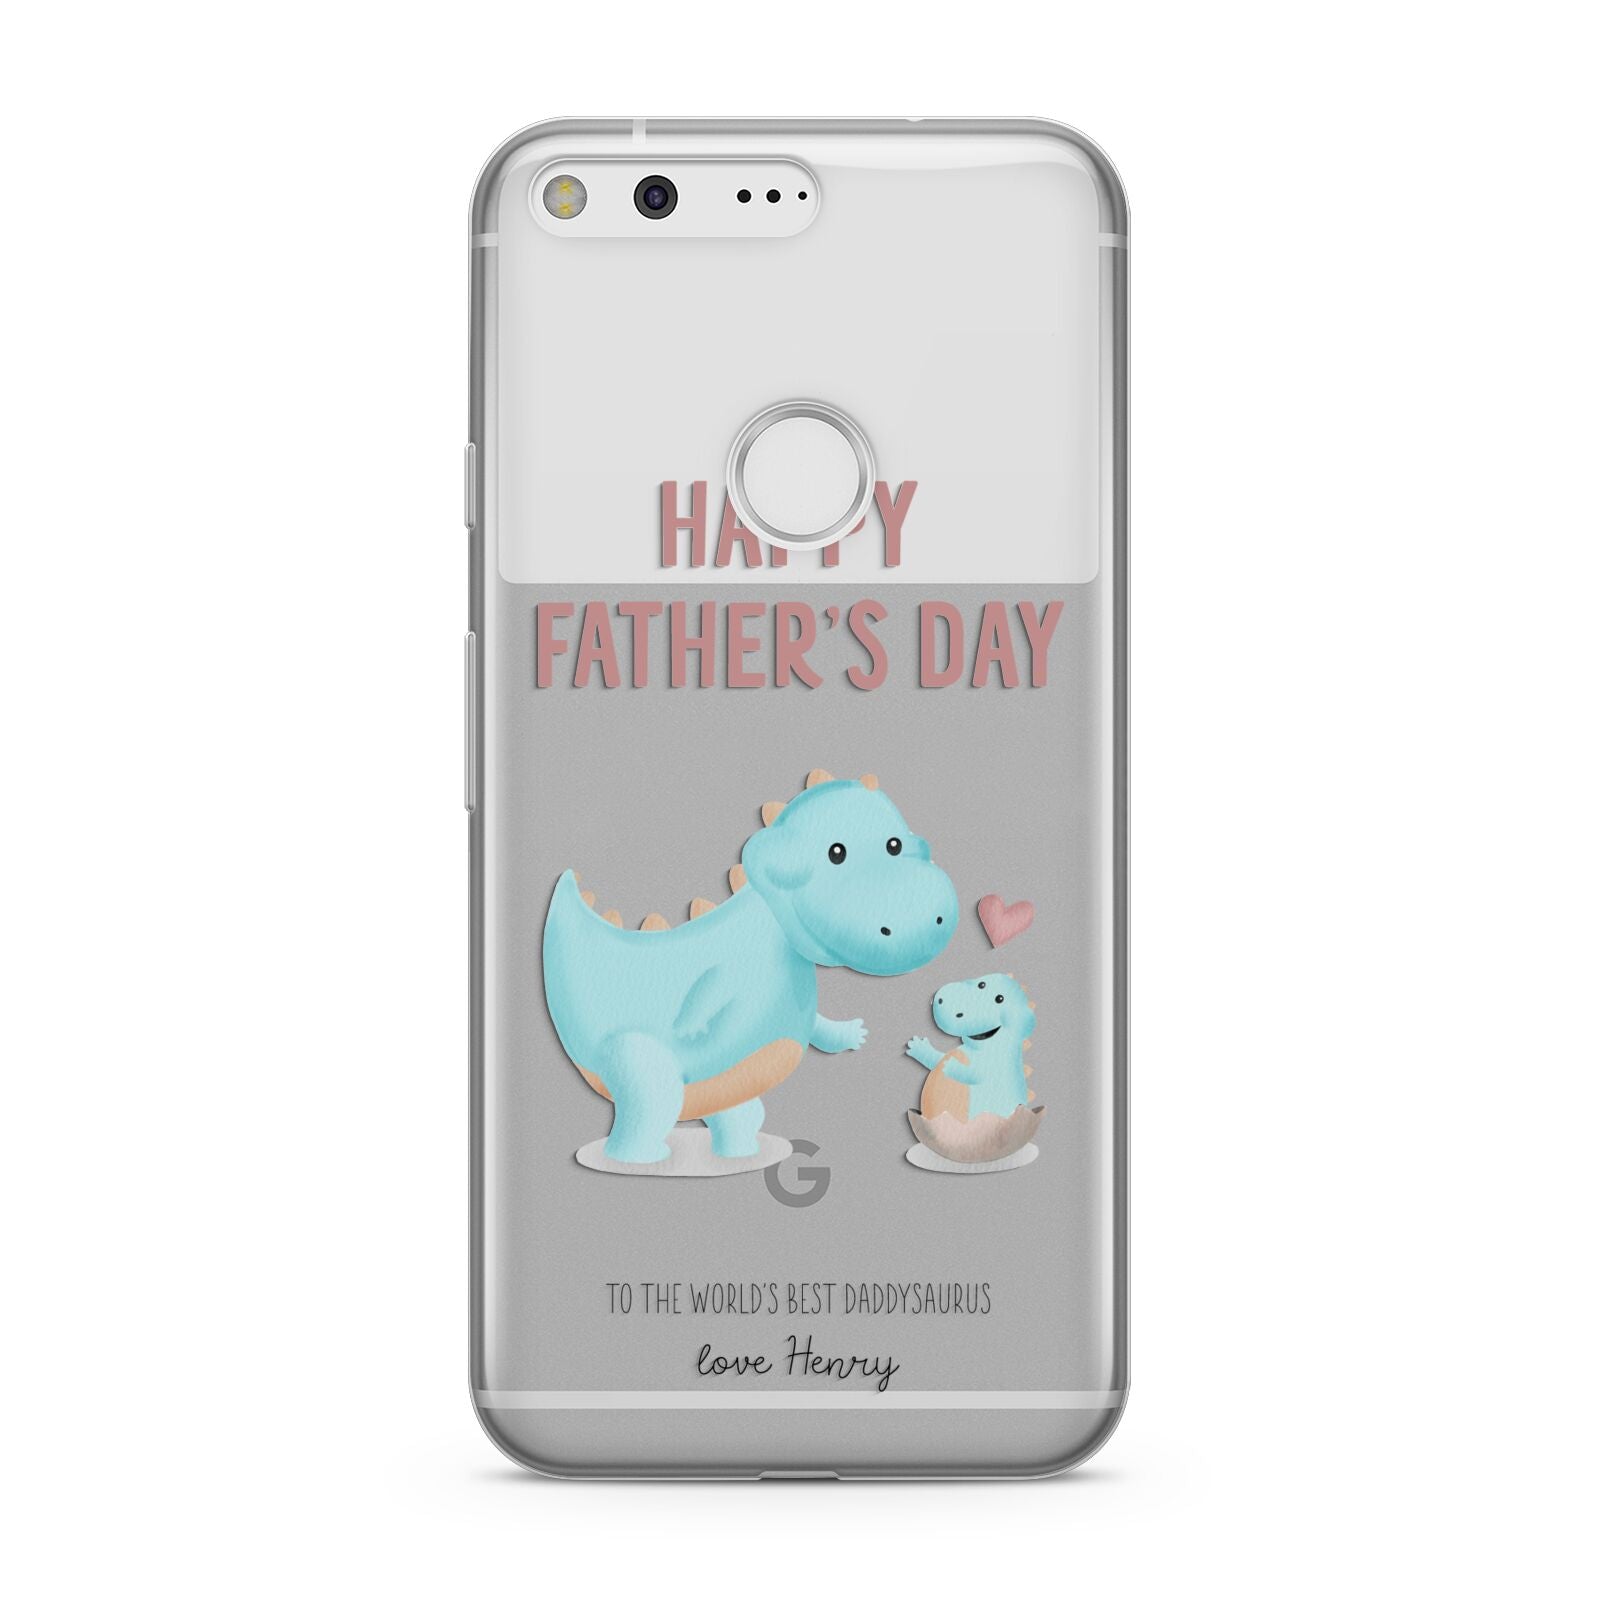 Happy Fathers Day Daddysaurus Google Pixel Case